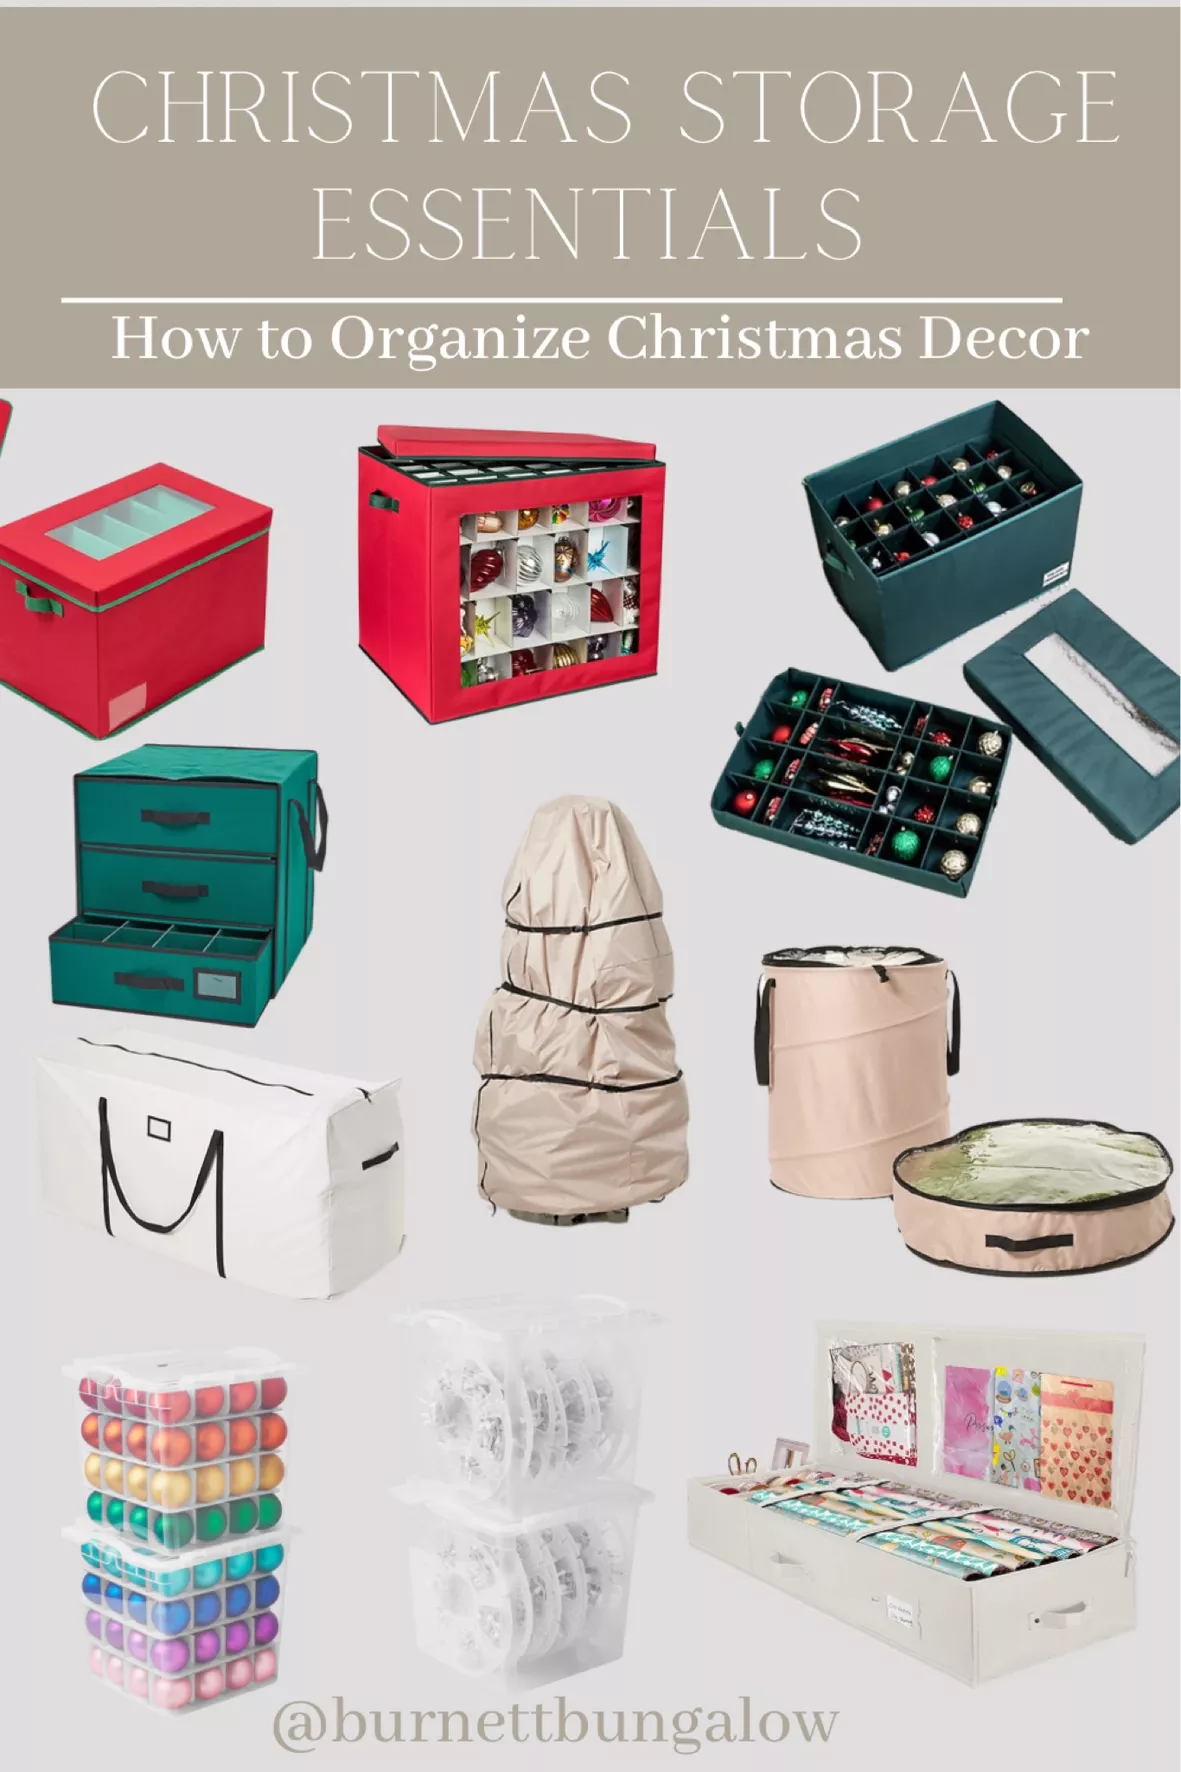 The Home Edit Ornament Organizer with Hinged Lid, Clear